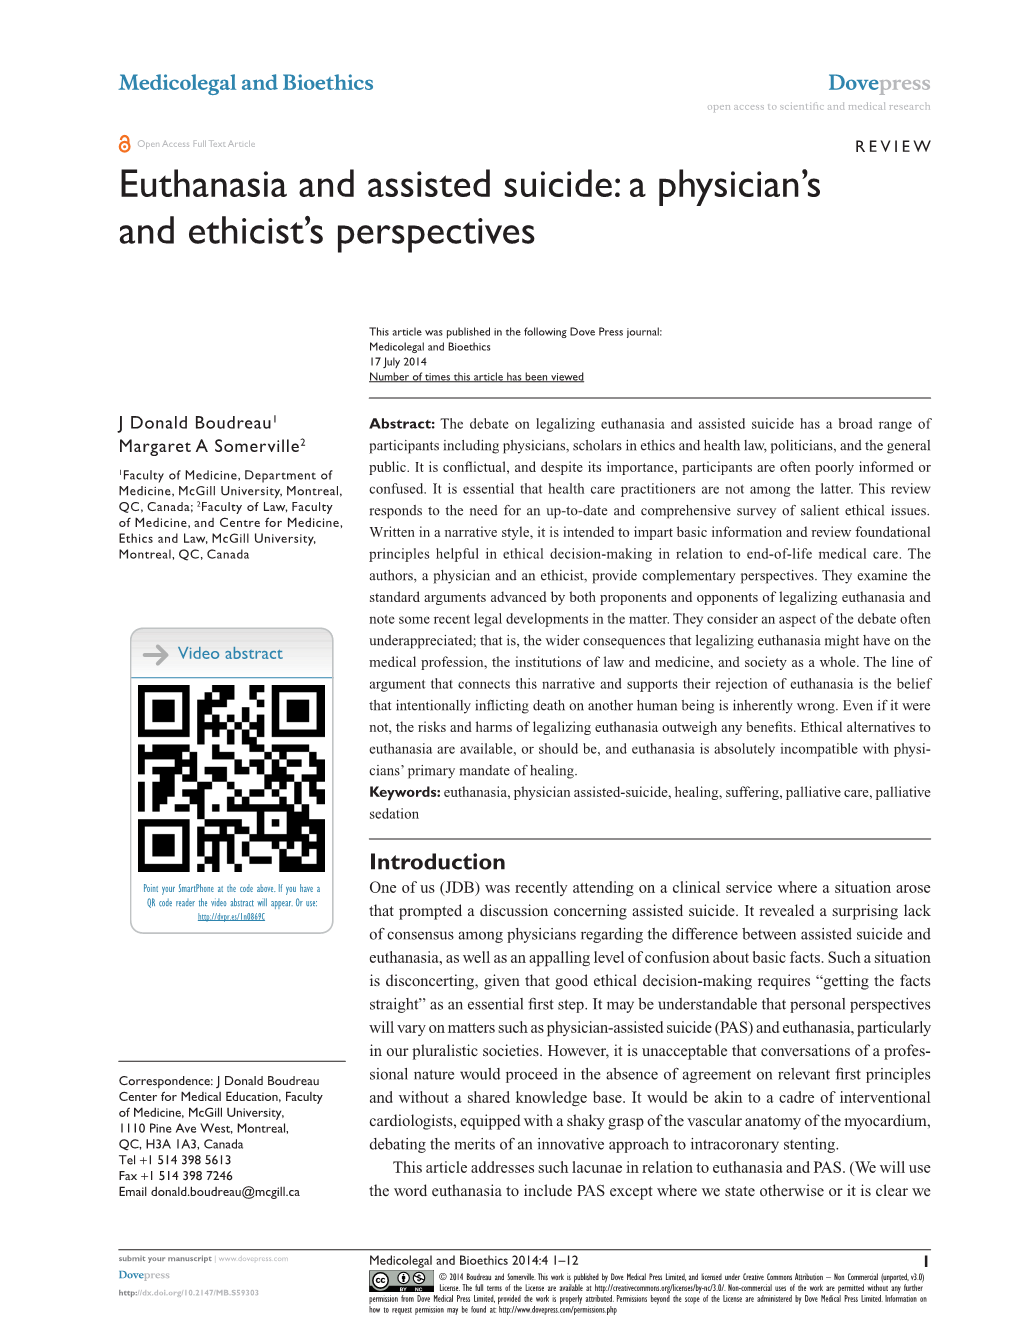 Euthanasia and Assisted Suicide: a Physician's and Ethicist's Perspectives